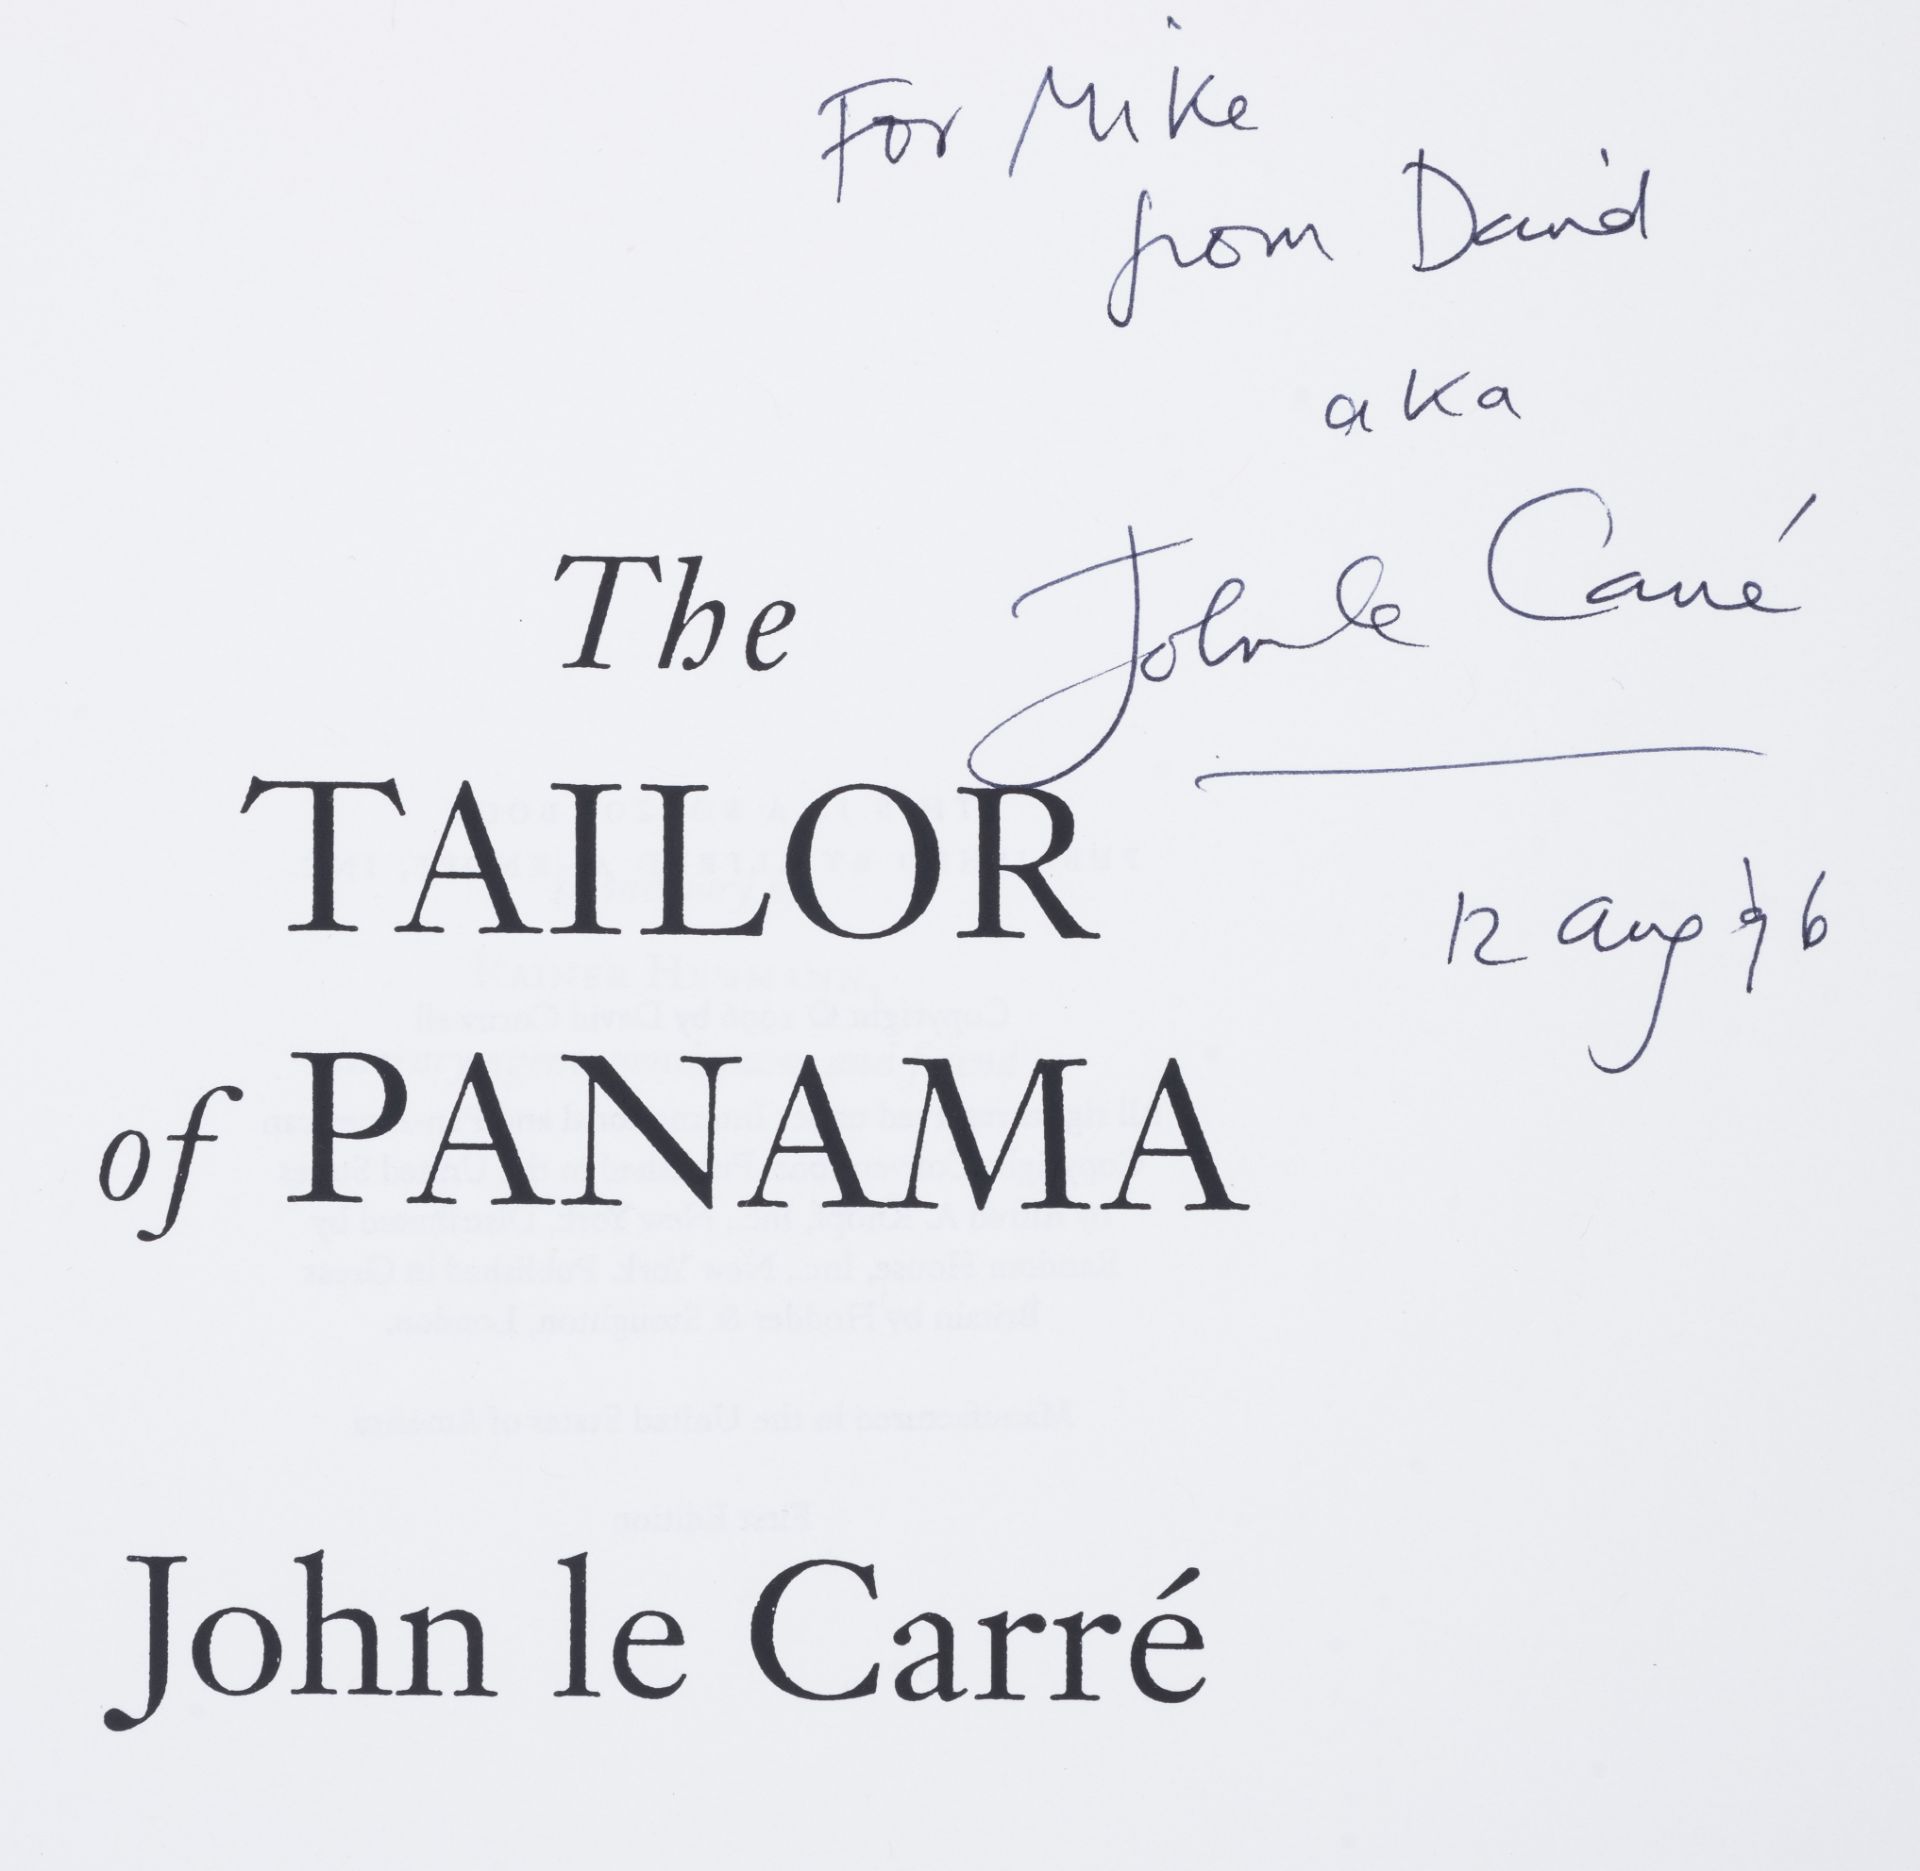 le Carré (John) The Tailor of Panama, special presentation proof copy, signed by the author, 1996. - Bild 2 aus 2